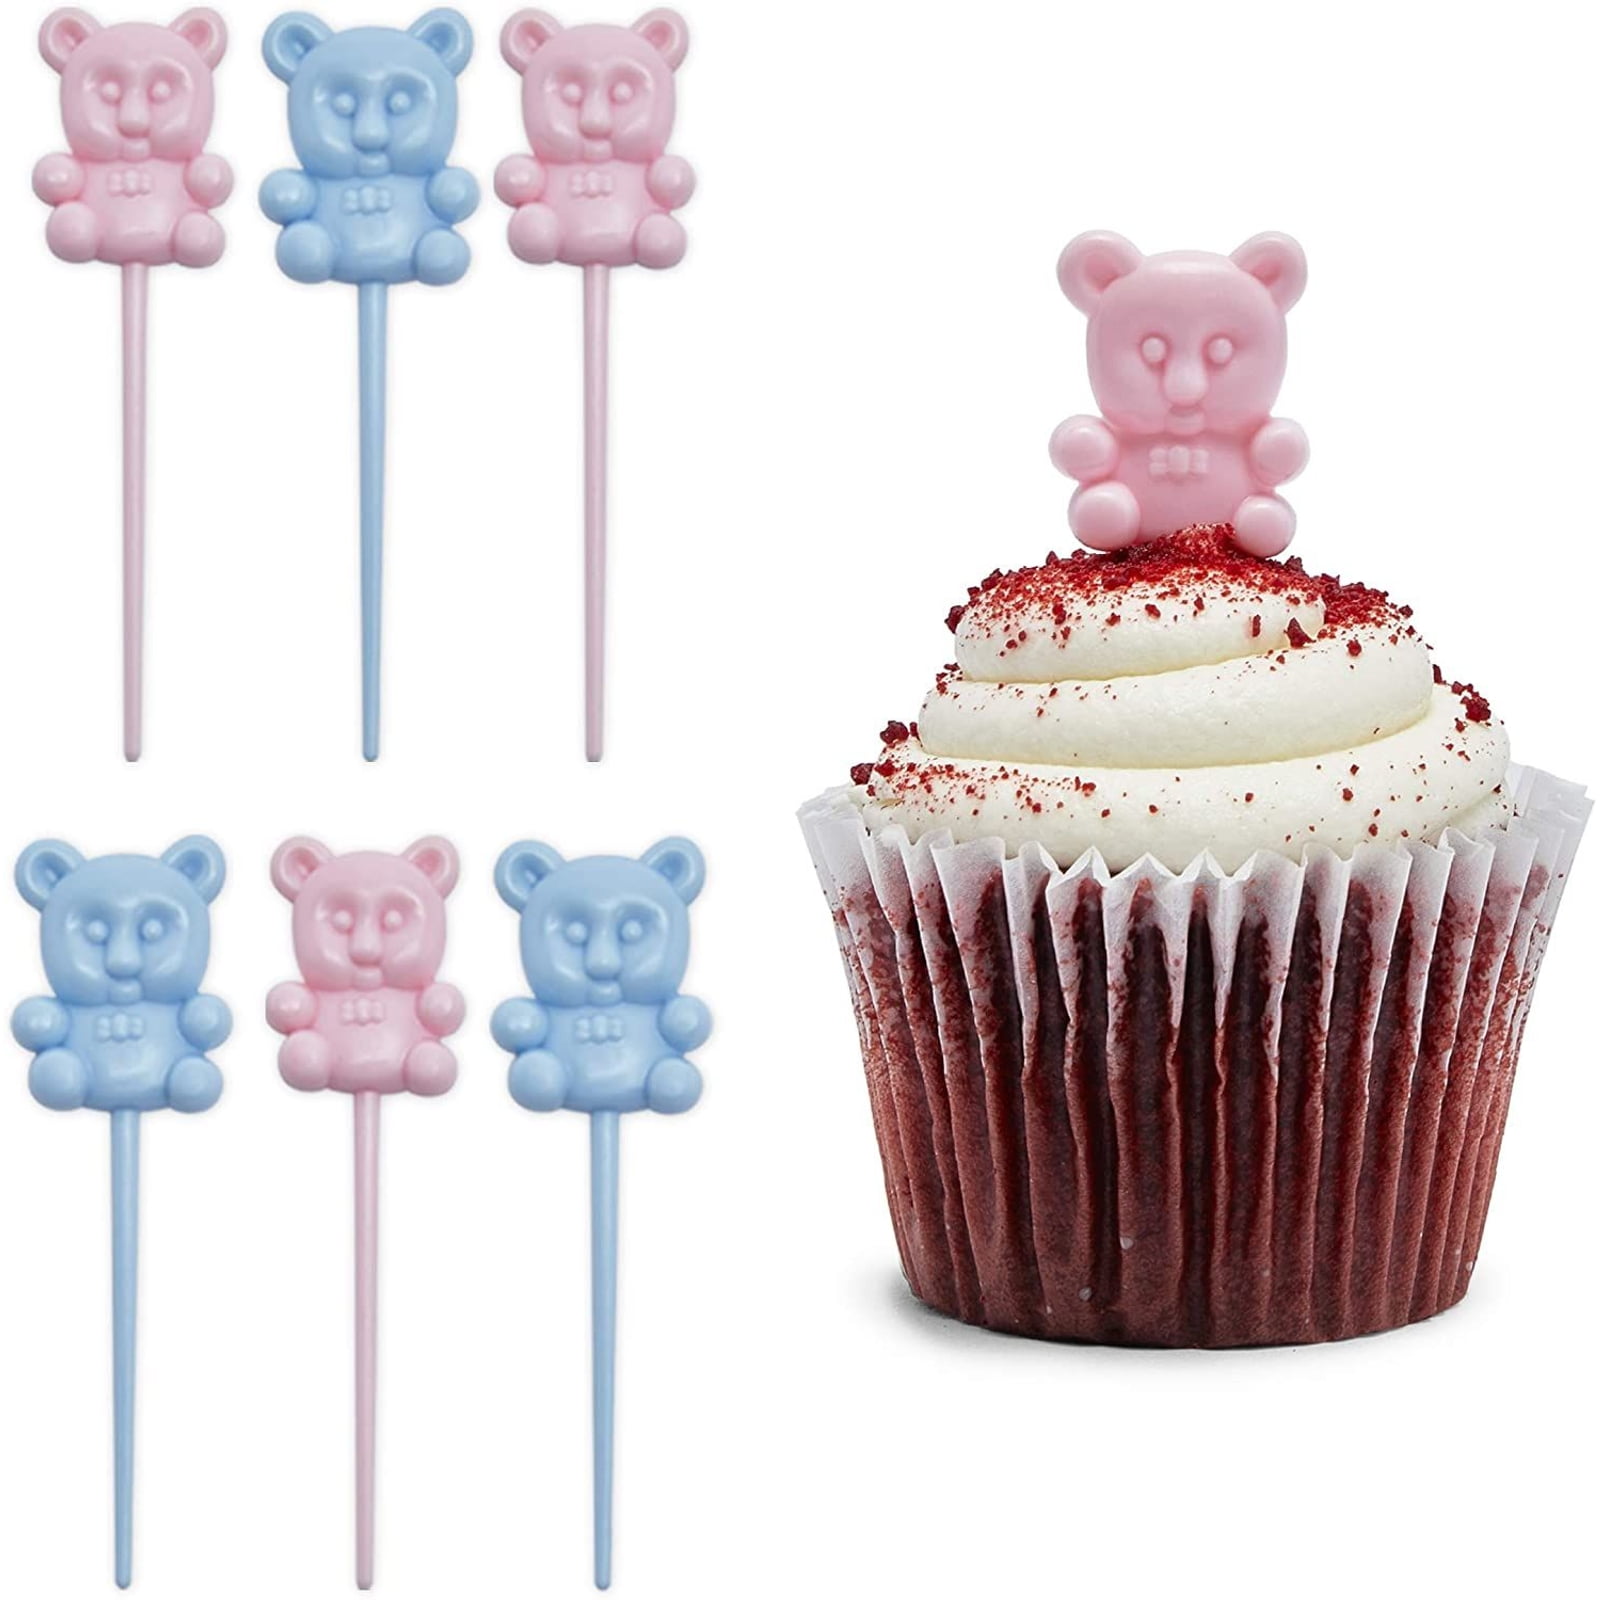 12 Heart Baby Grow Cupcake Toppers Cake Baby Shower Party Gender Reveal Boy Girl 